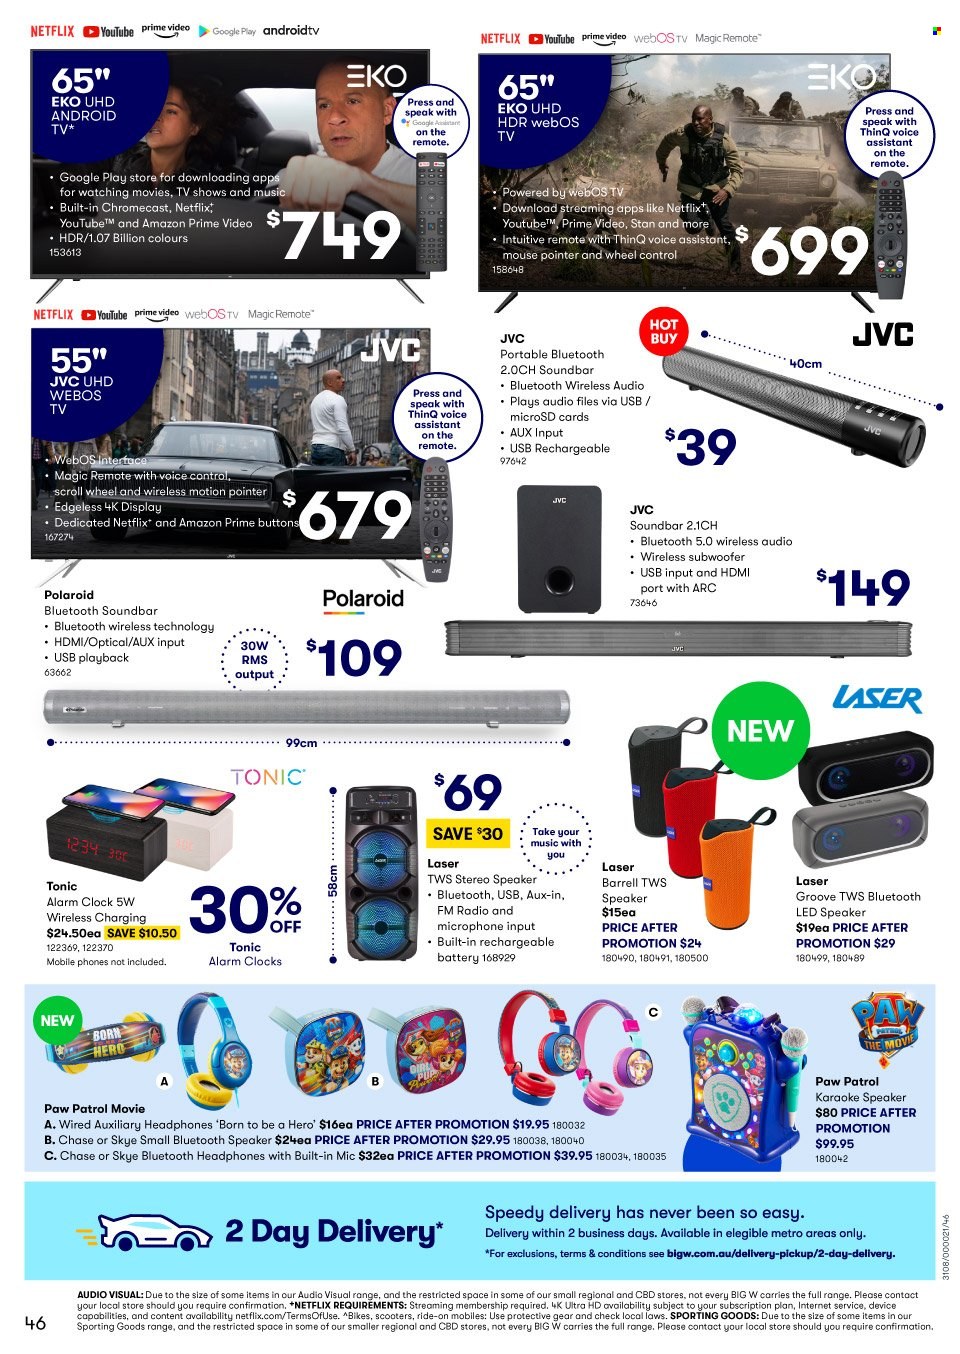 thumbnail - BIG W Catalogue - Sales products - Paw Patrol, tonic, clock, mouse, Android TV, UHD TV, ultra hd, JVC, TV, radio, speaker, subwoofer, wireless subwoofer, bluetooth speaker, sound bar, headphones. Page 46.